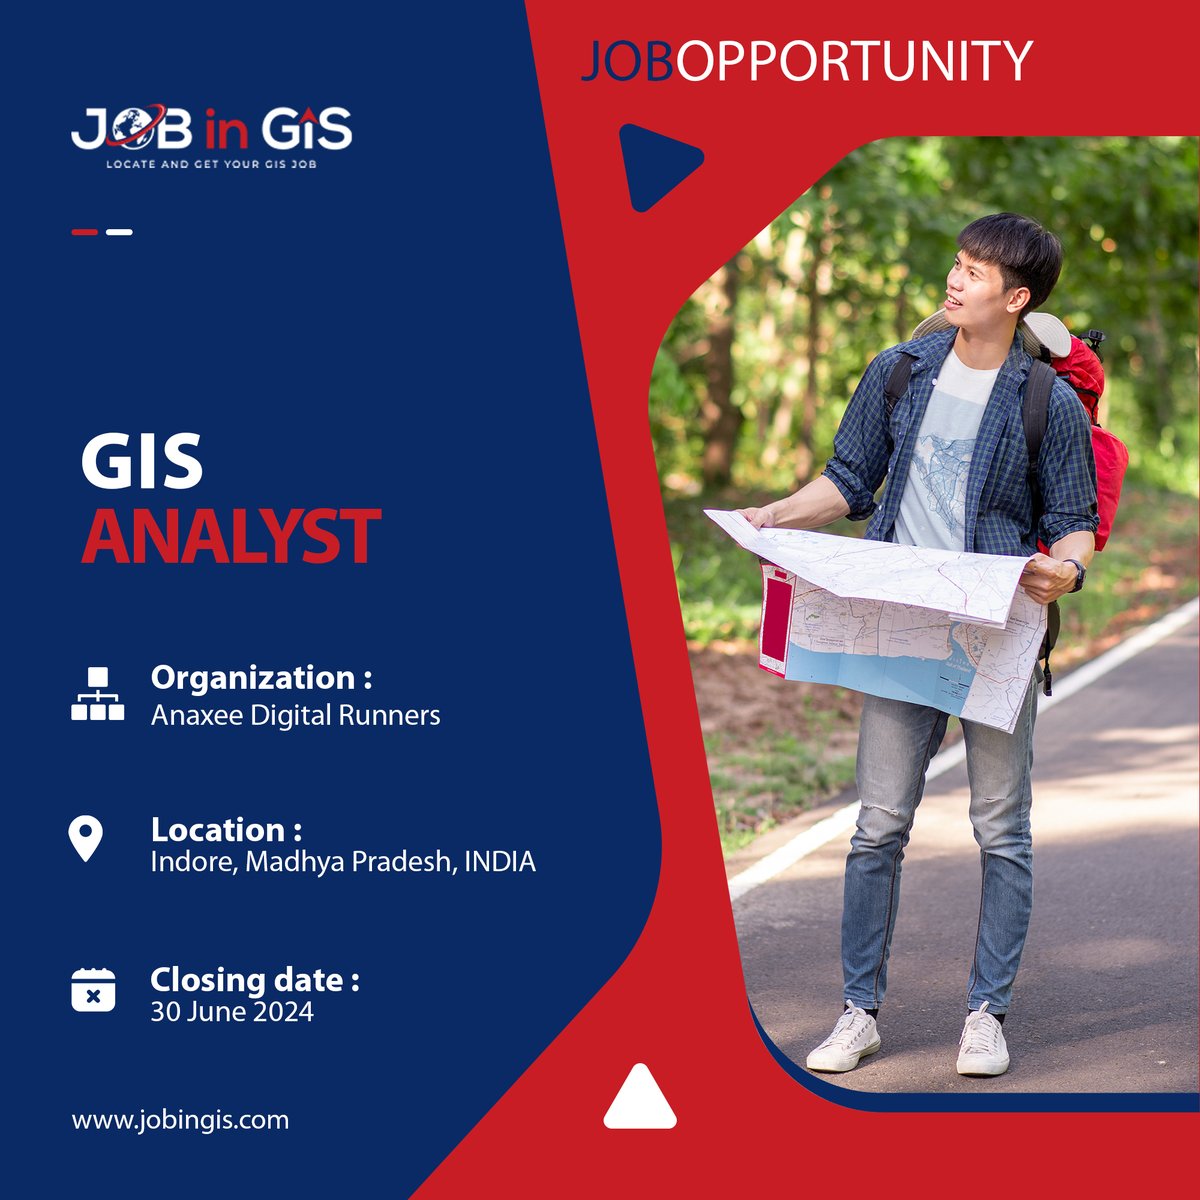 #jobingis : Anaxee Digital Runners is hiring a GIS Analyst
📍 : #Indore, #MadhyaPradesh #India 

Apply here 👉 : jobingis.com/jobs/gis-analy…

#Jobs #mapping #GIS #geospatial #remotesensing #gisjobs #Geography #cartography #remotejobs #remotework